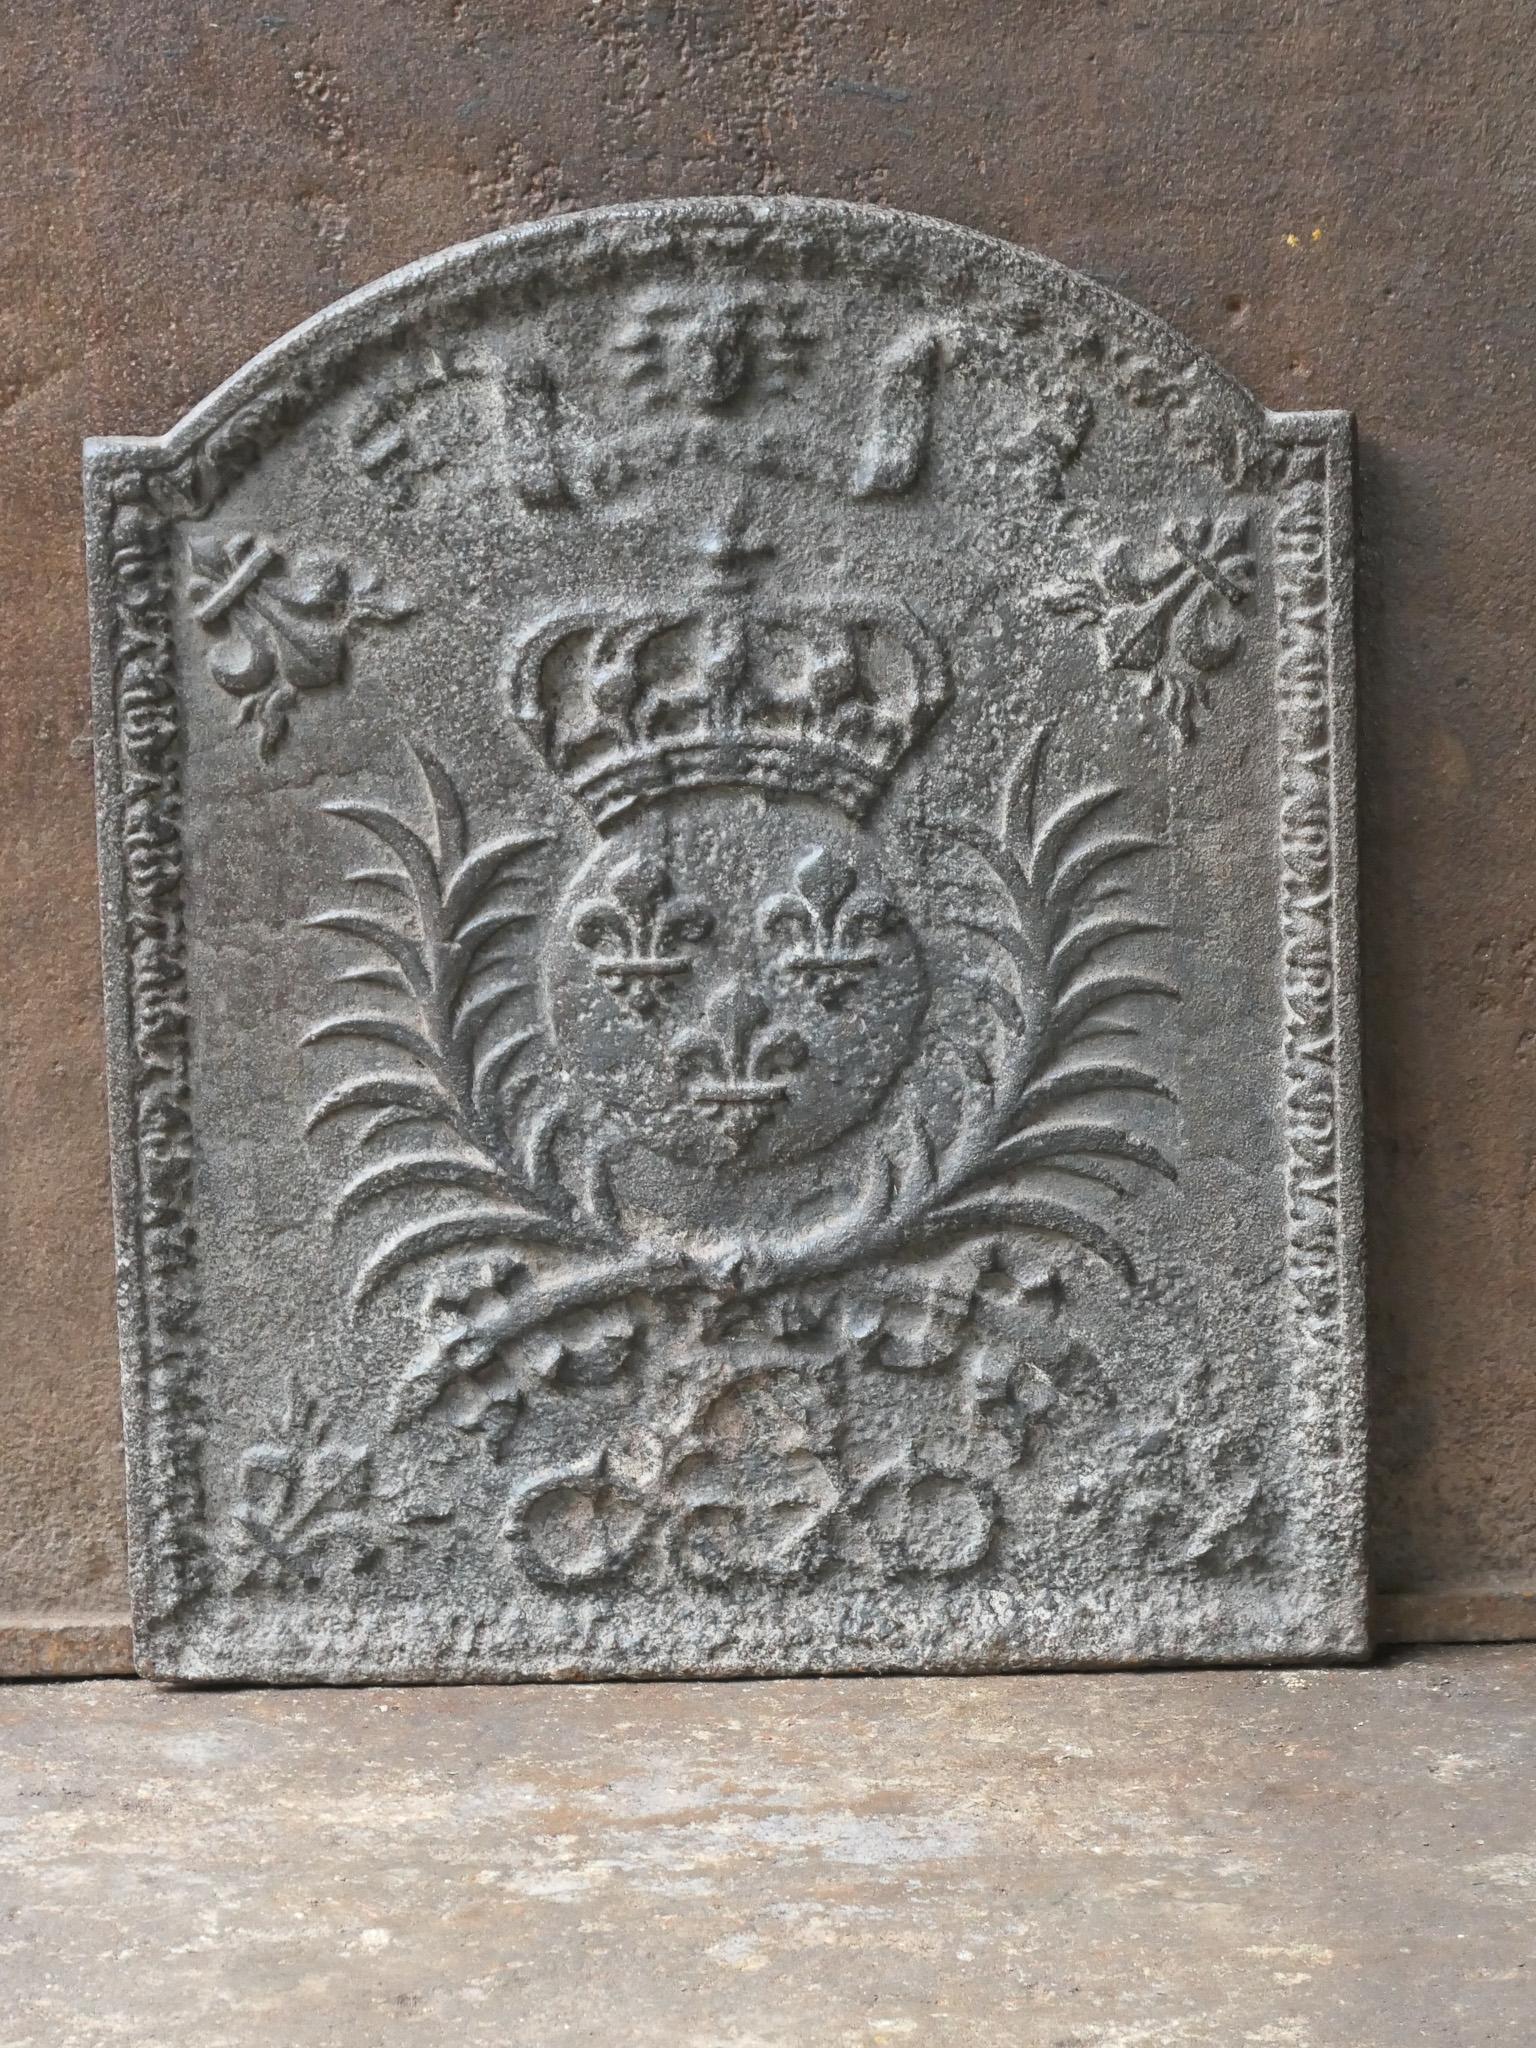 18th century French Louis XIV period fireback with the Arms of France. A coat of arms of the House of Bourbon, an originally French royal house that became a major dynasty in Europe. The house delivered kings for Spain (Navarra), France, both